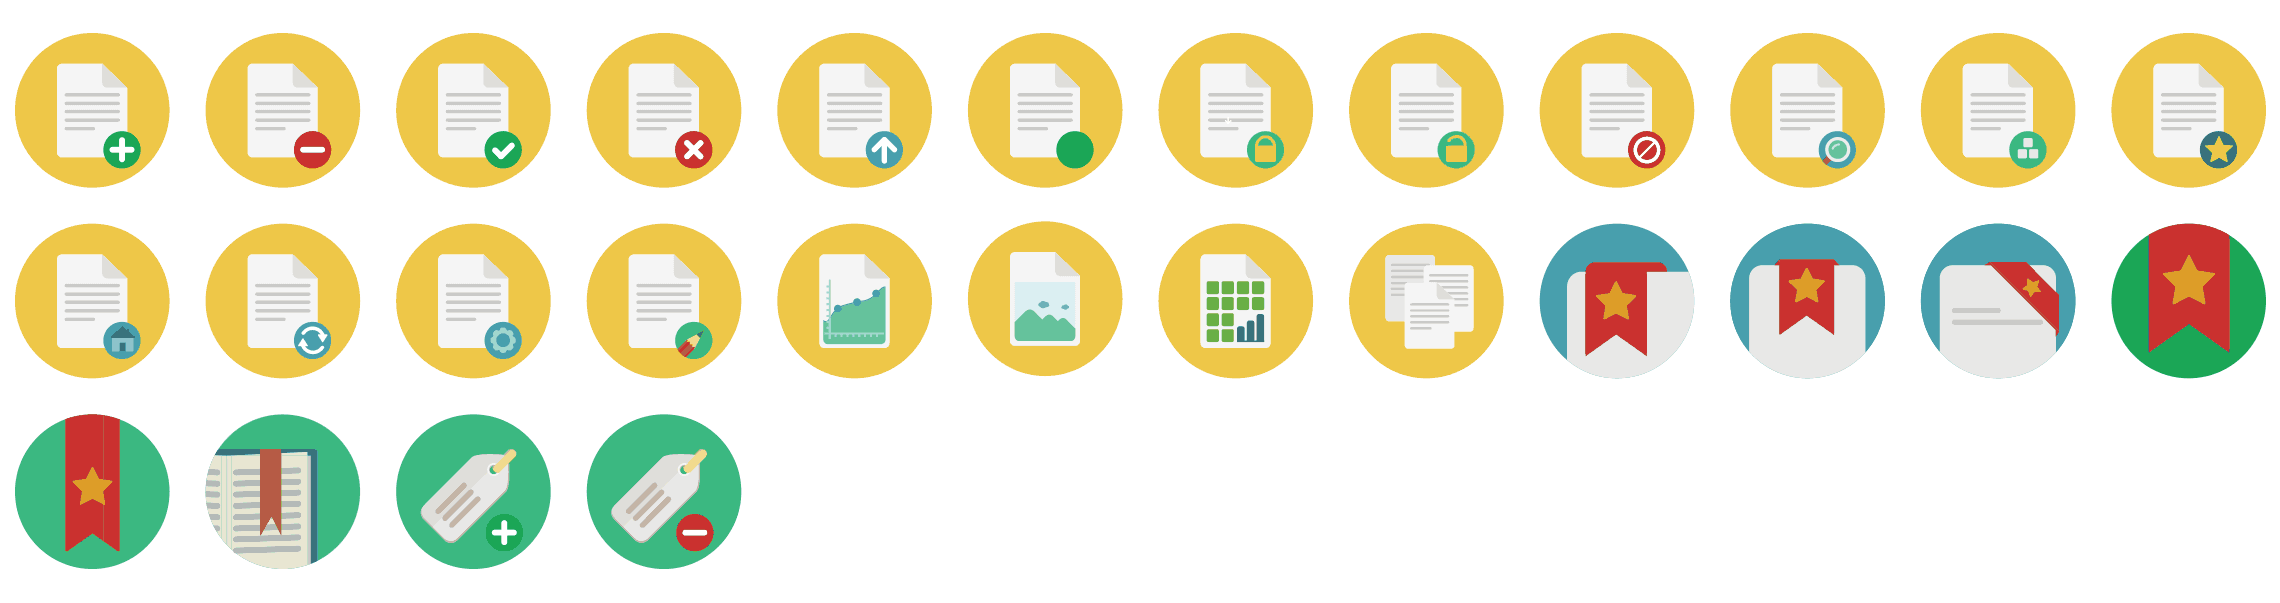 documents-flat-icons-vol-1-preview